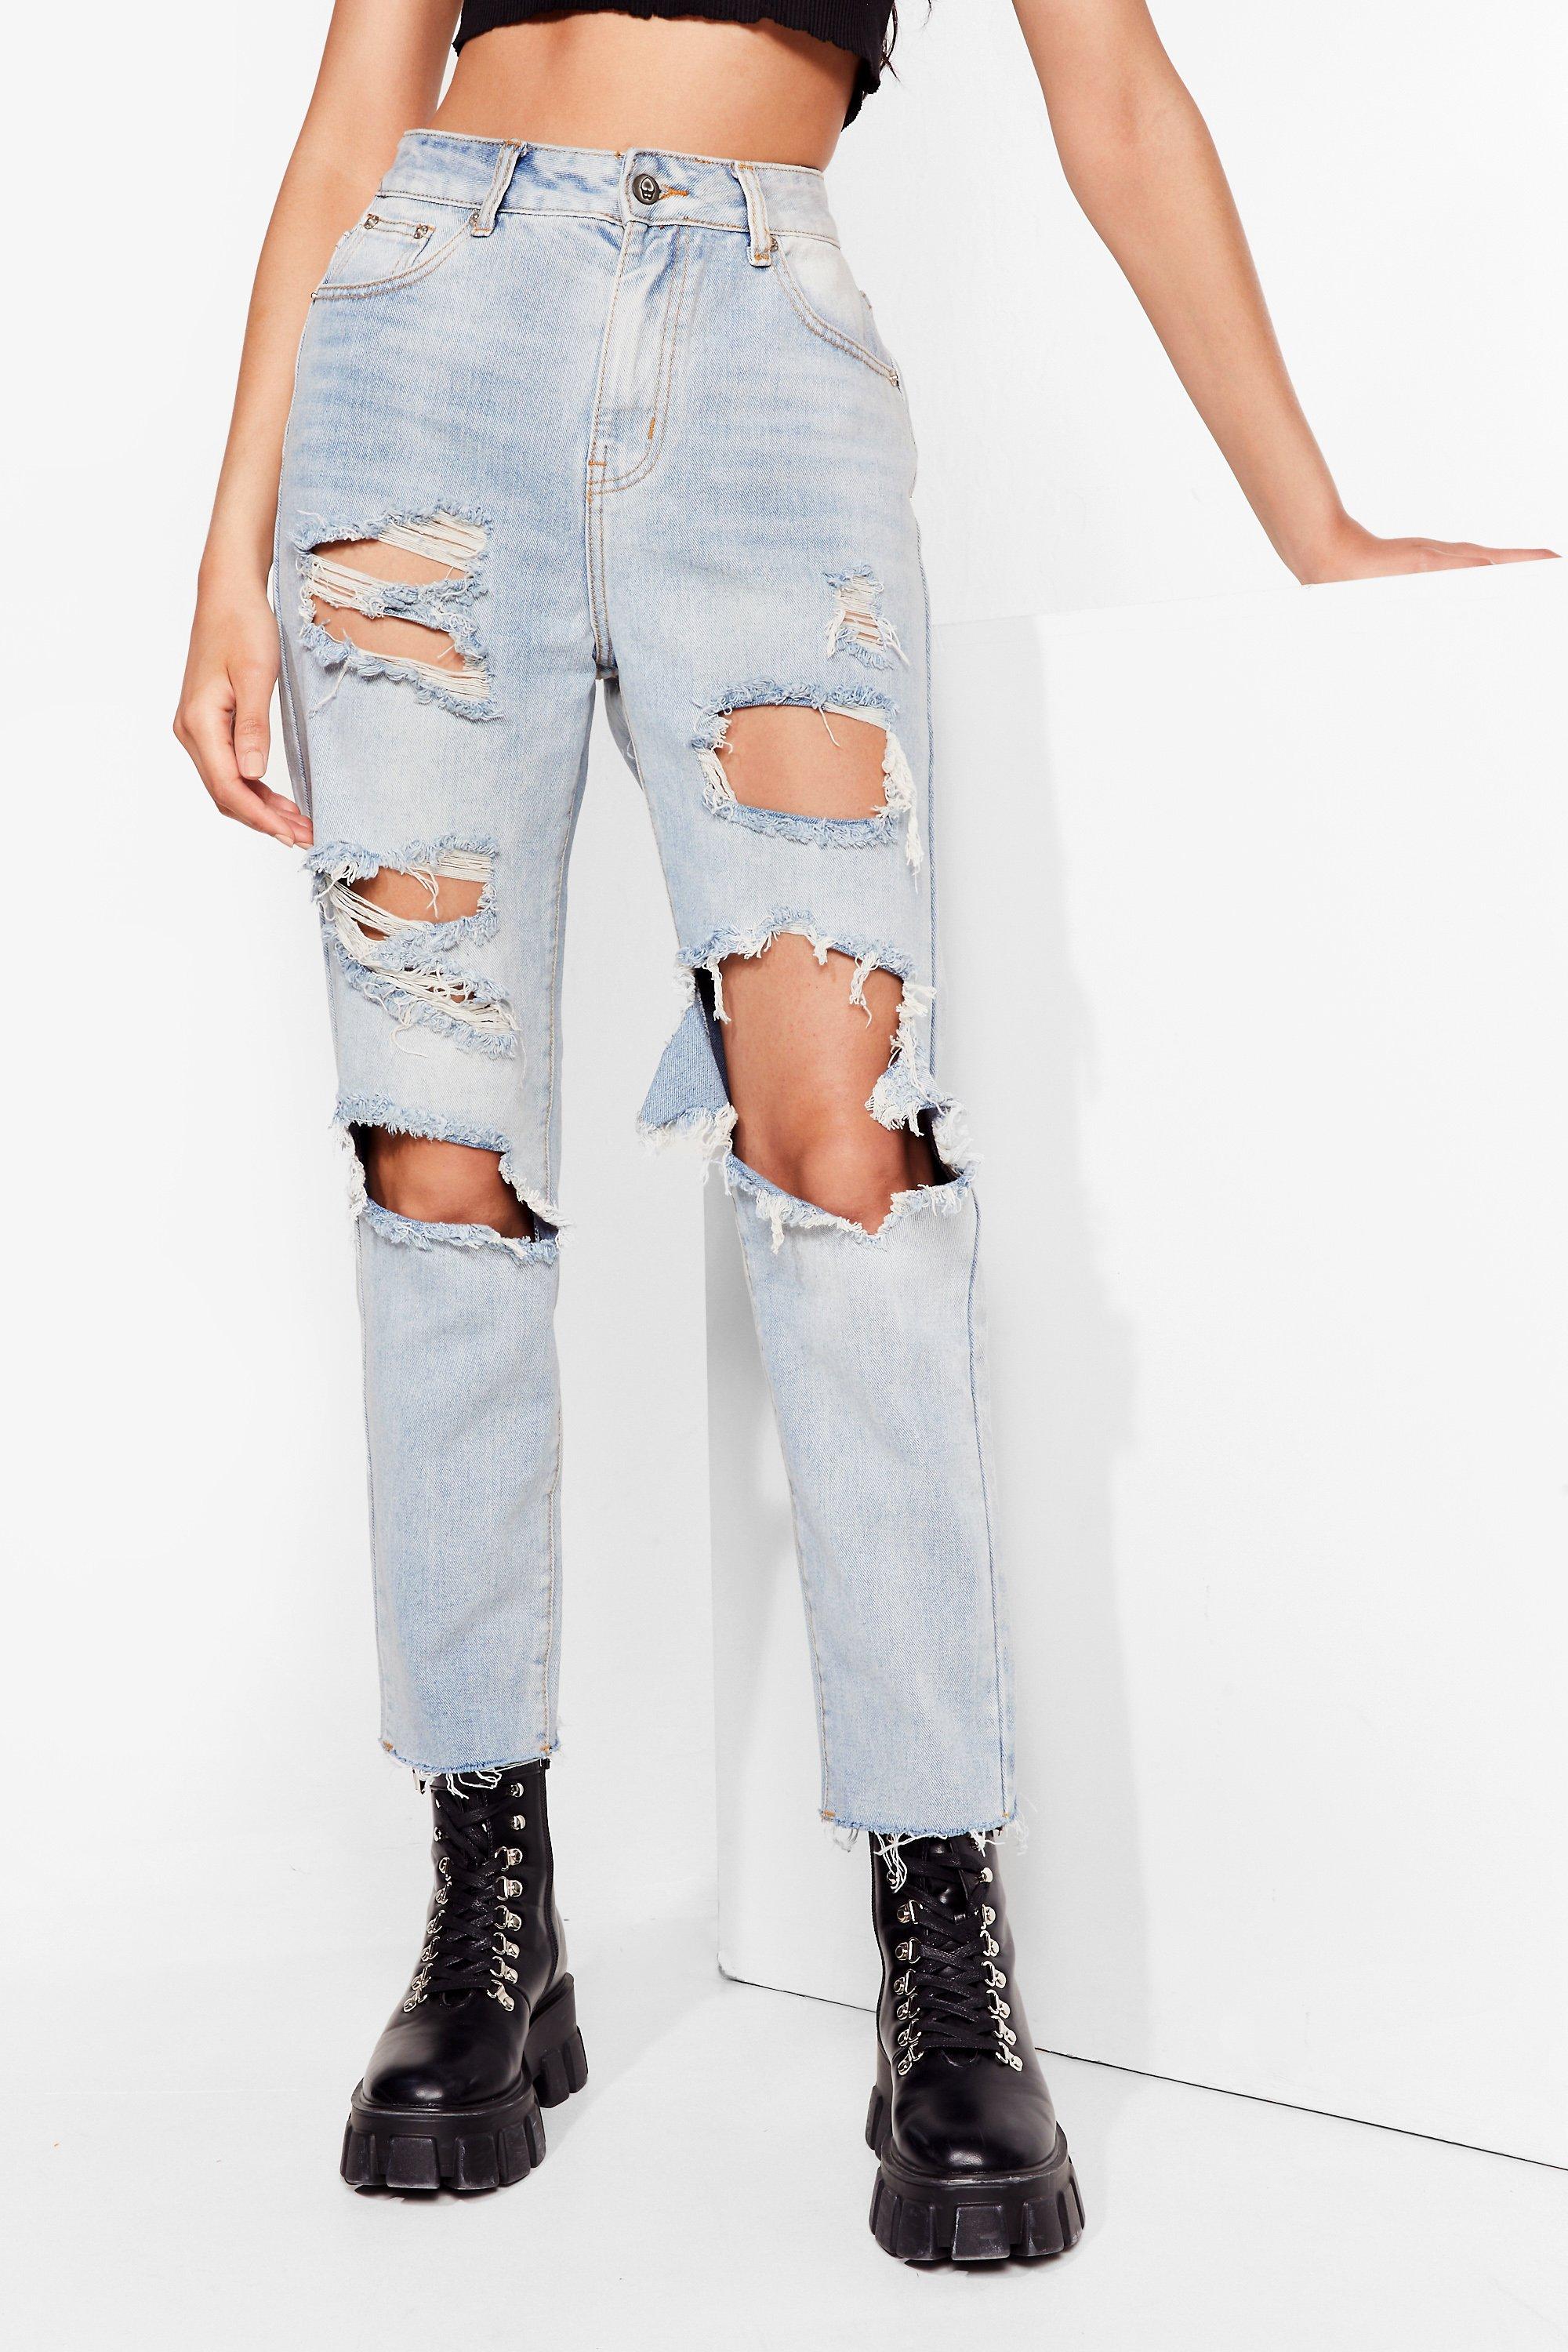 jeans distressed